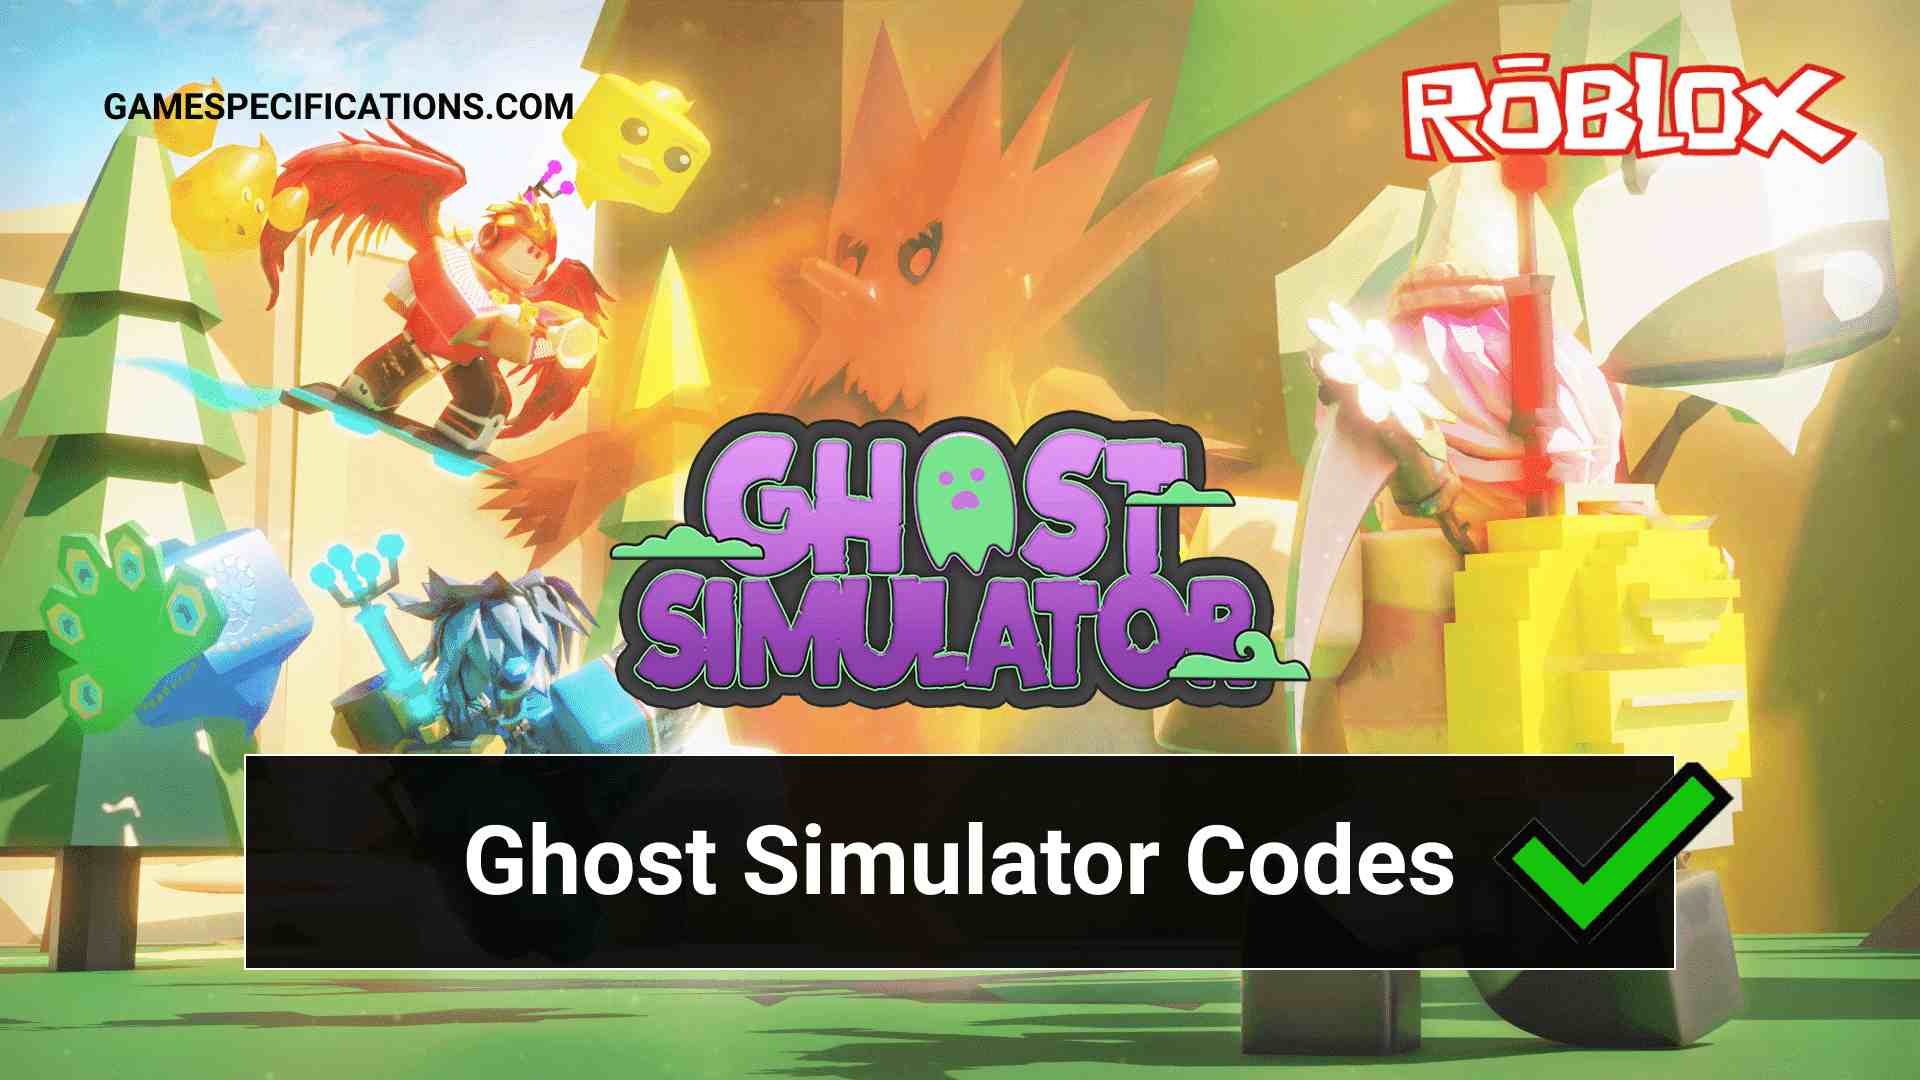 55 Roblox Ghost Simulator Codes To Get Free Rewards July 2021 Game Specifications - codes for gost simulator roblox